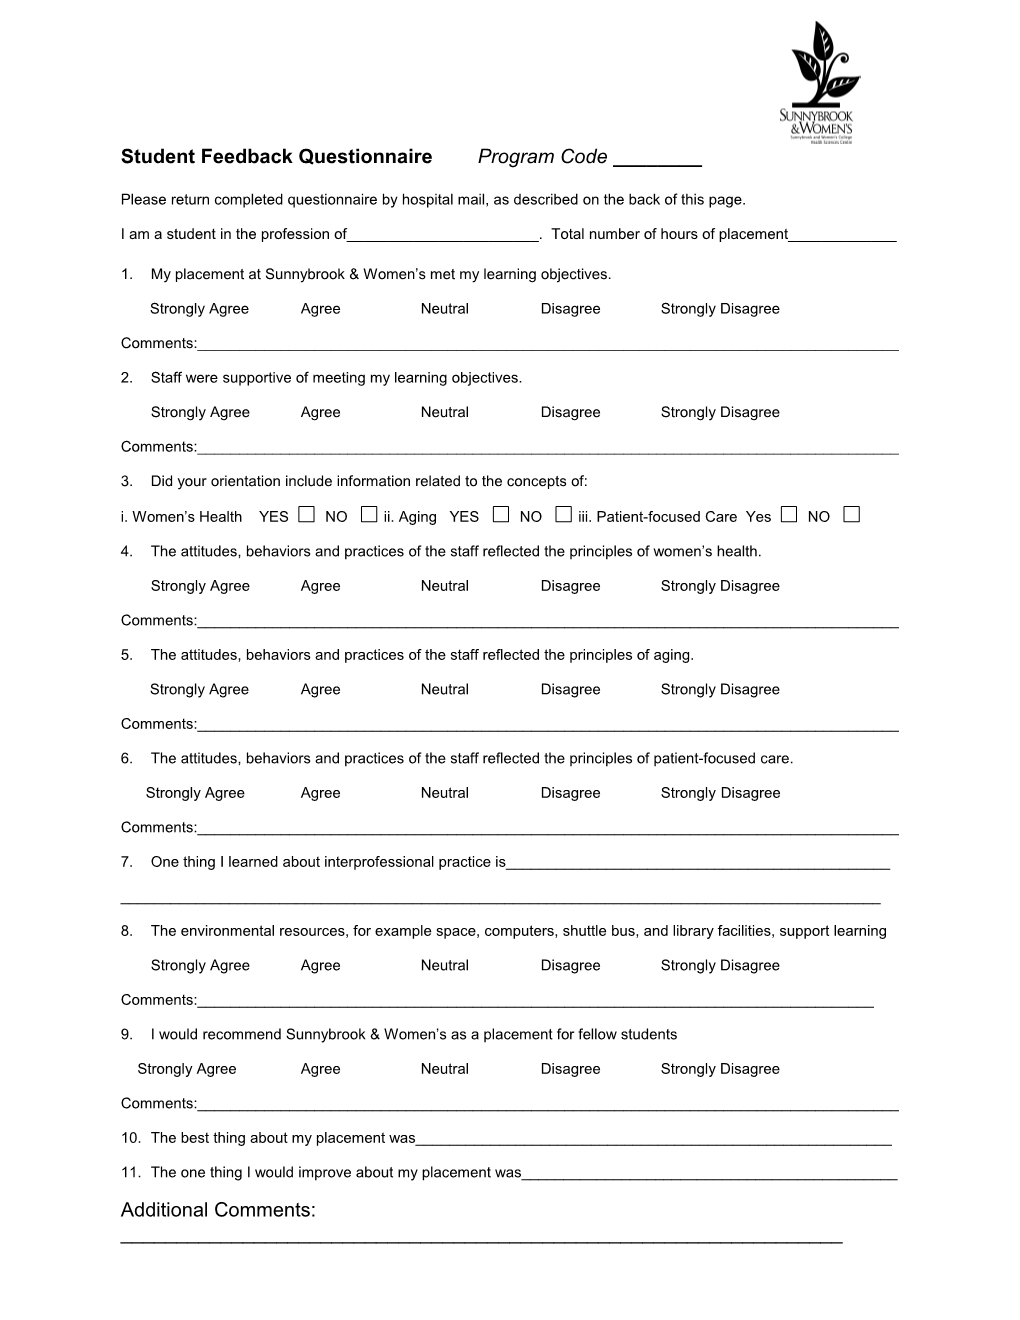 Student Satisfaction Feedback Questionnaire